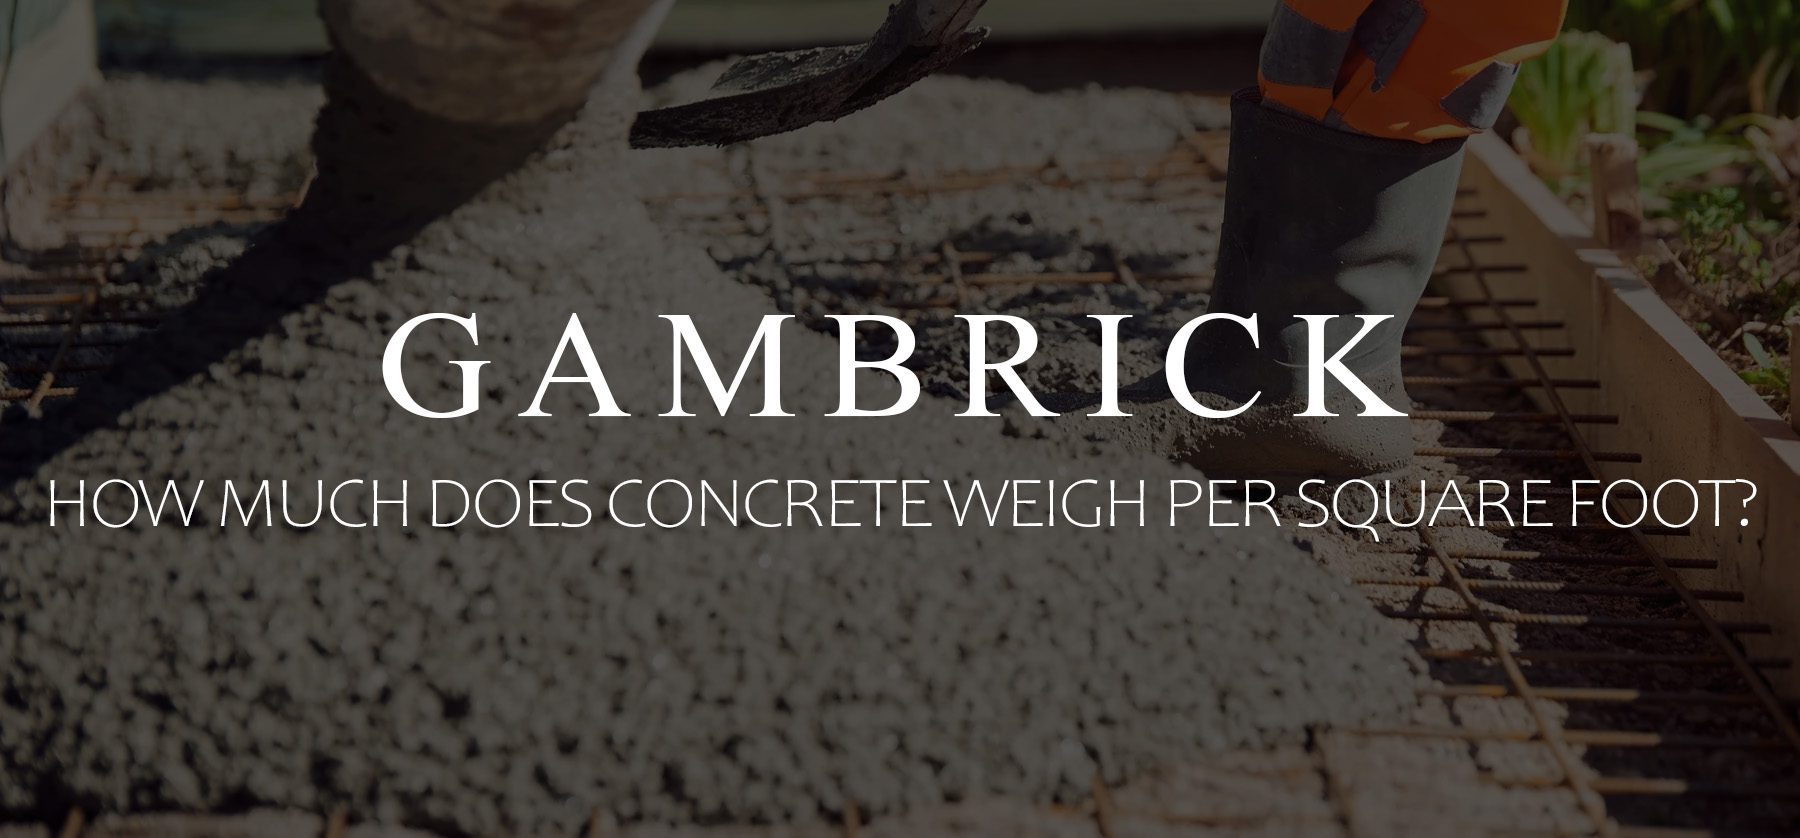 how much does concrete weigh per square foot banner